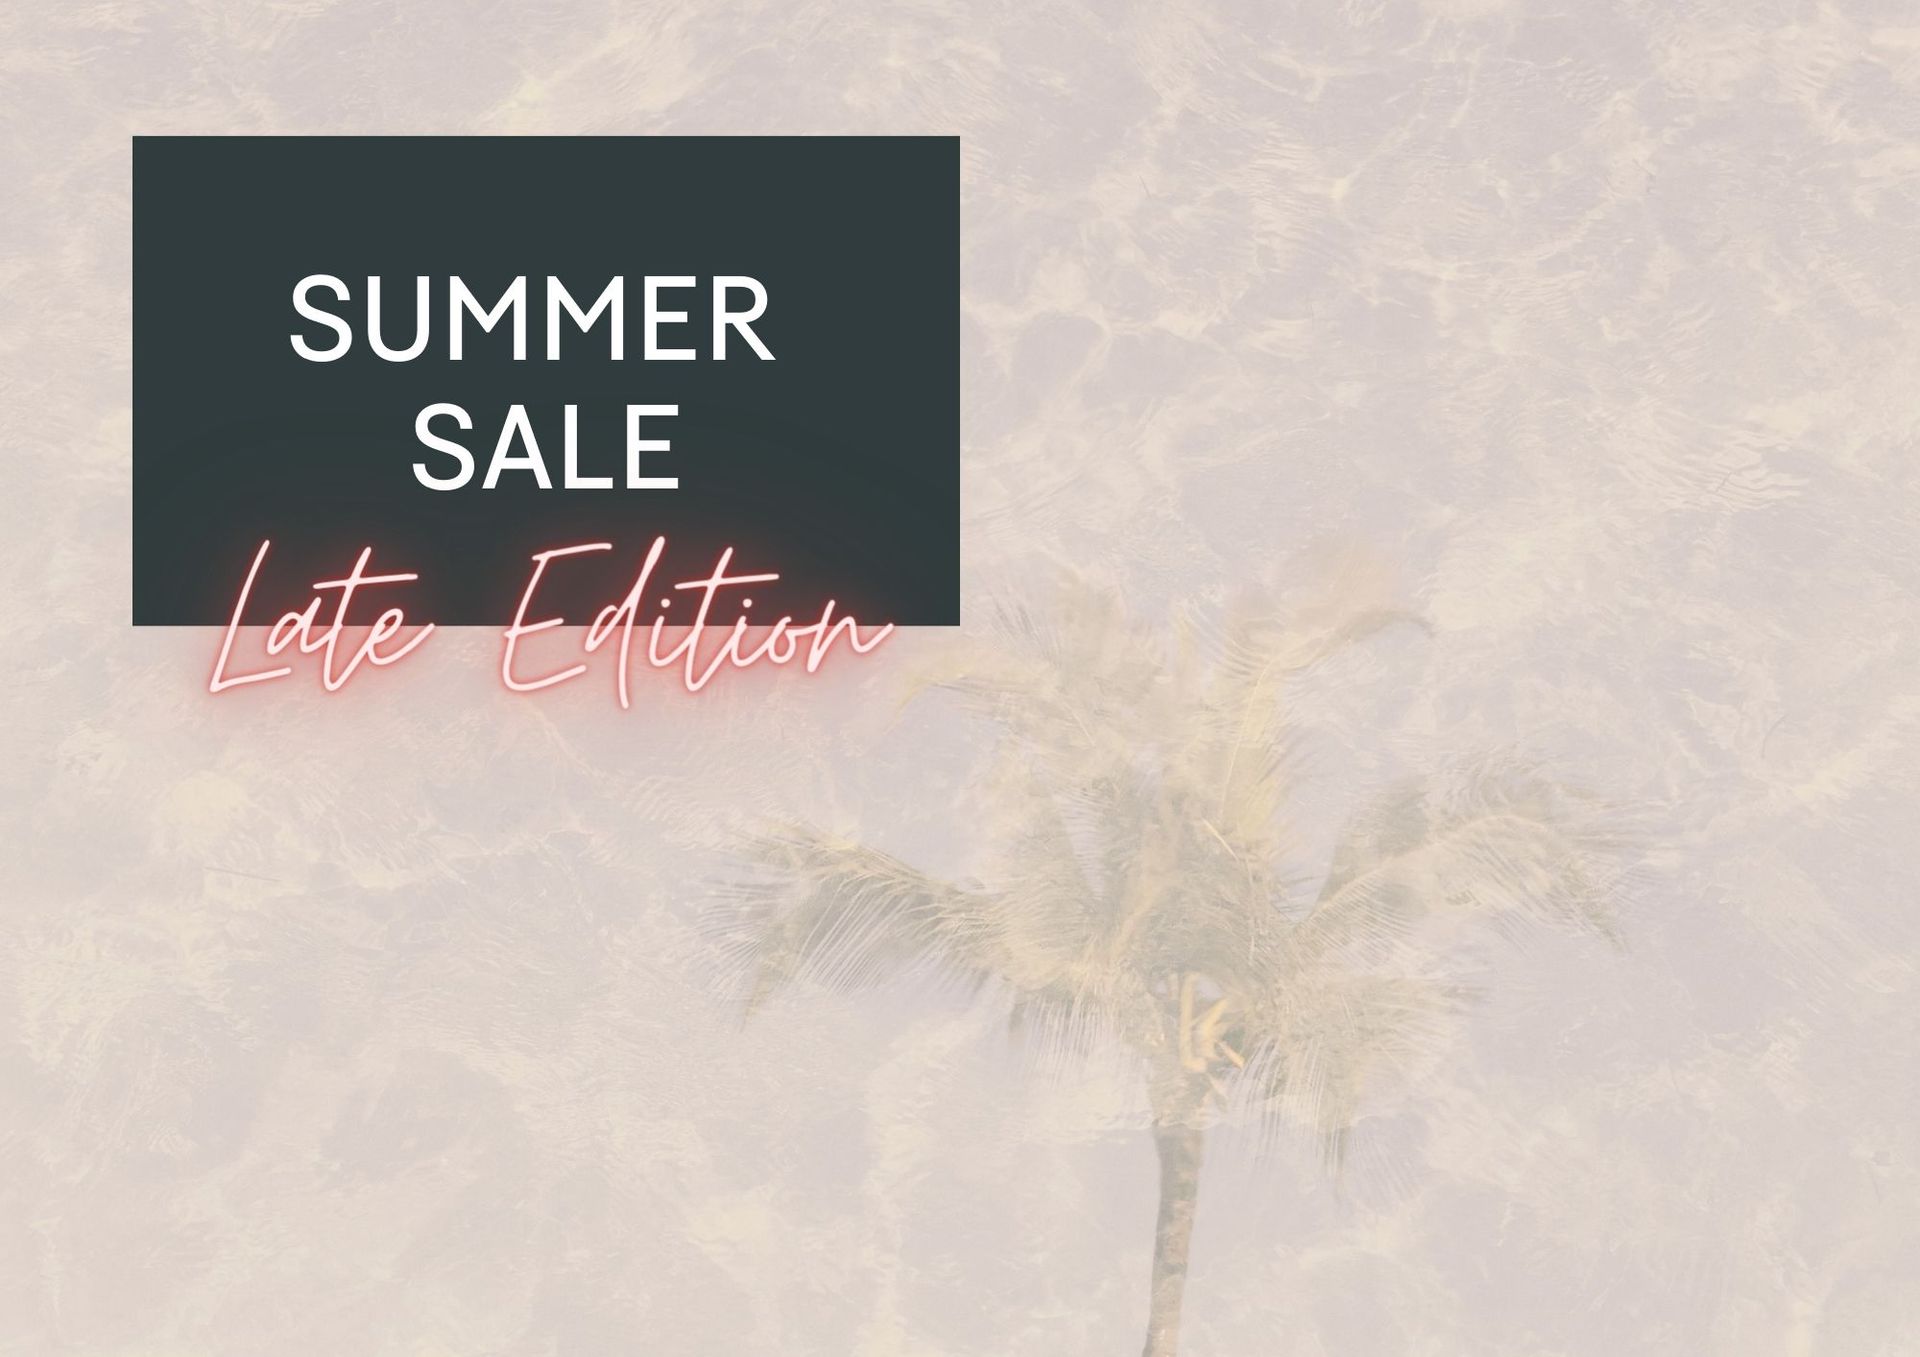 Late Summer Sale